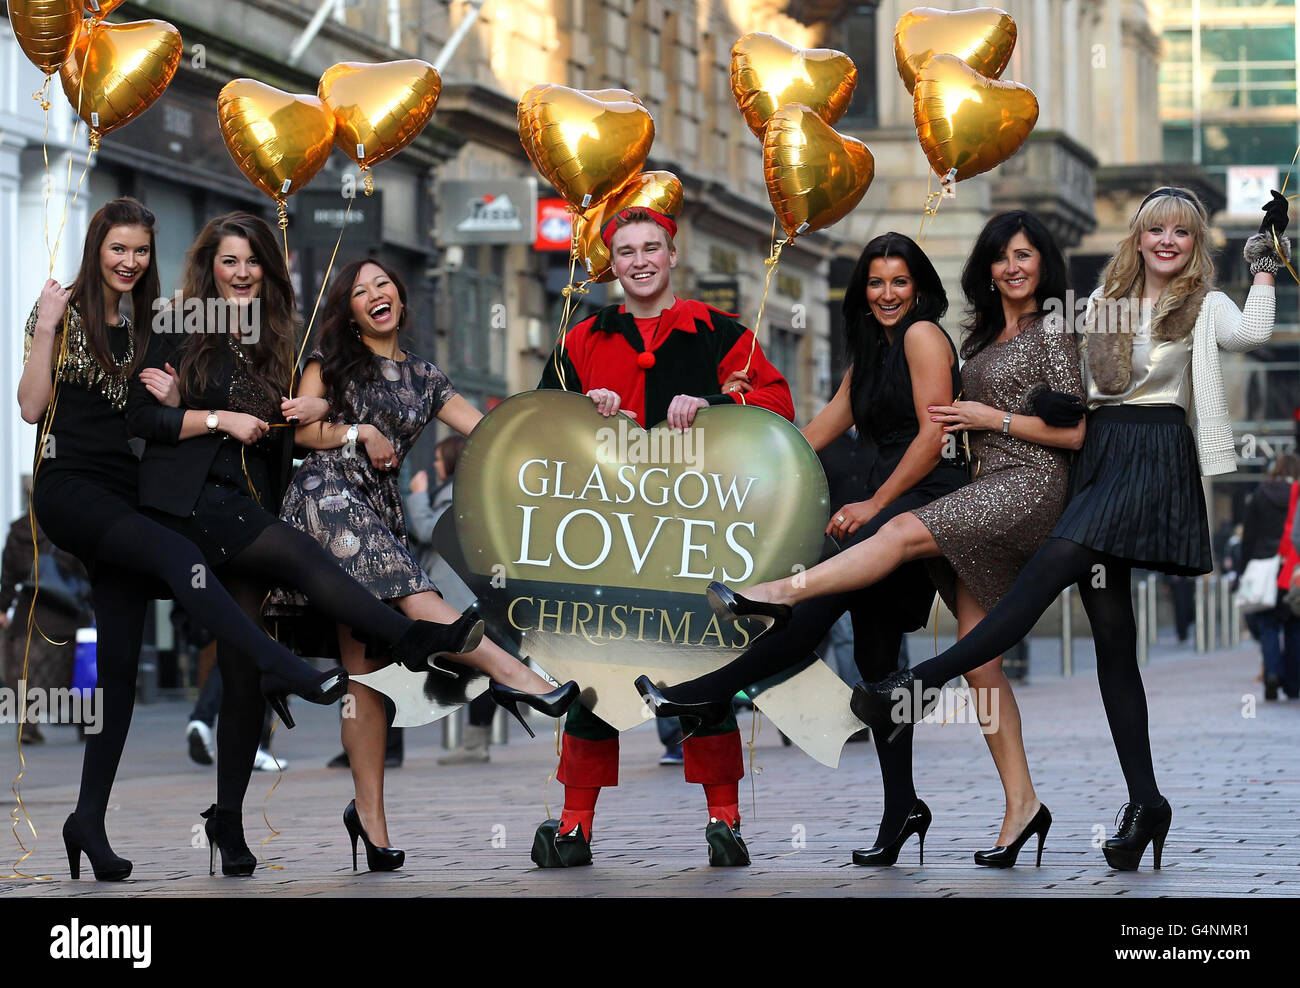 (left - right) Lorna Reoch from Frasers, Christine Robb from Folli Follie, Debbie Chung from Rox (on behalf of Argyll Arcade), James Breadner as an elf from Hamleys, Debbie Lawson from Dower and Hall (on behalf of Princess Square), Cathy McCarthy from John Lewis and Sarah Brand from Oasis in Buchanan Galleries for the Glasgow Loves Christmas campaign 2011 launched in Buchanan Street, Glasgow by representatives from seven of the city's leading retailers. Stock Photo